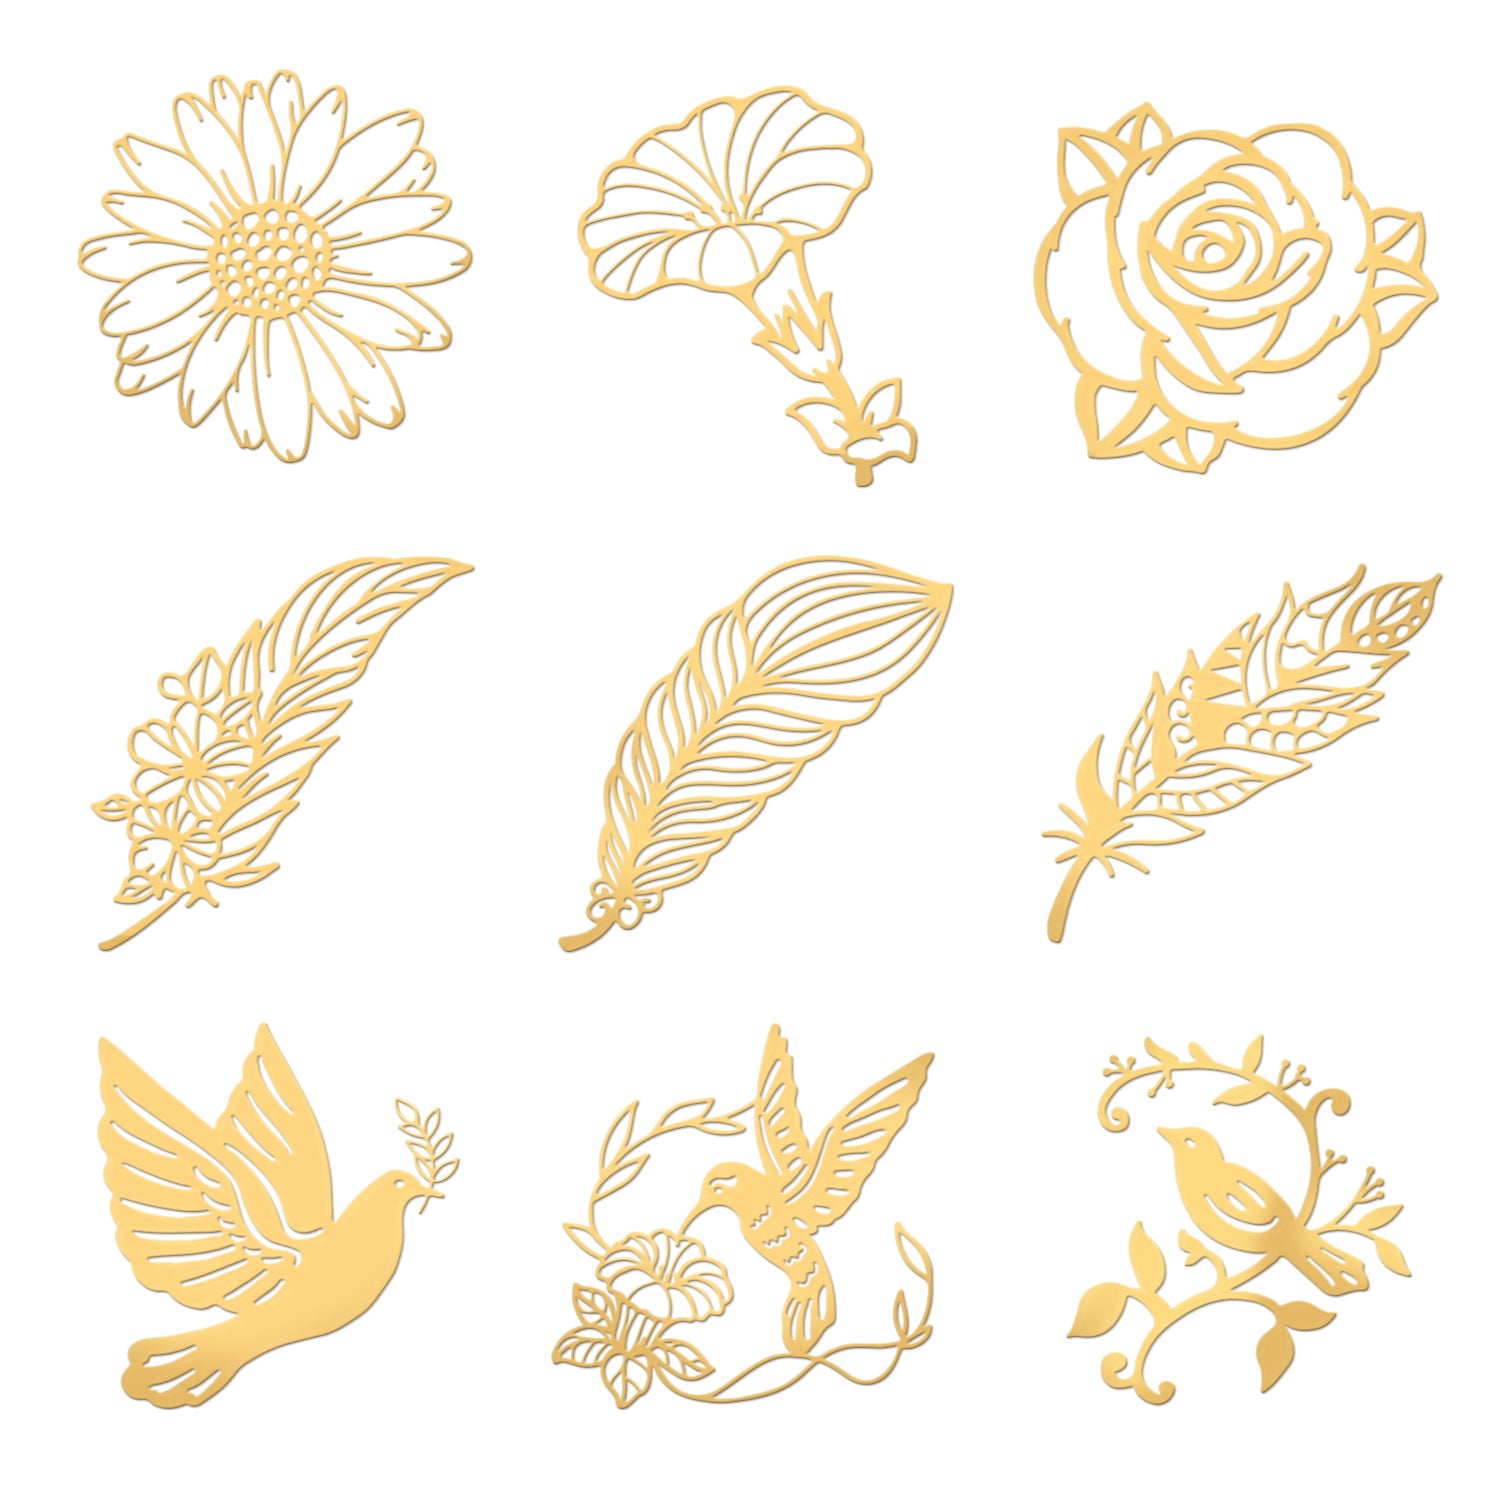 9Pcs 9 Styles Custom Carbon Steel Self-adhesive Picture Stickers, Golden, Flower & Leaf & Bird, Mixed Patterns